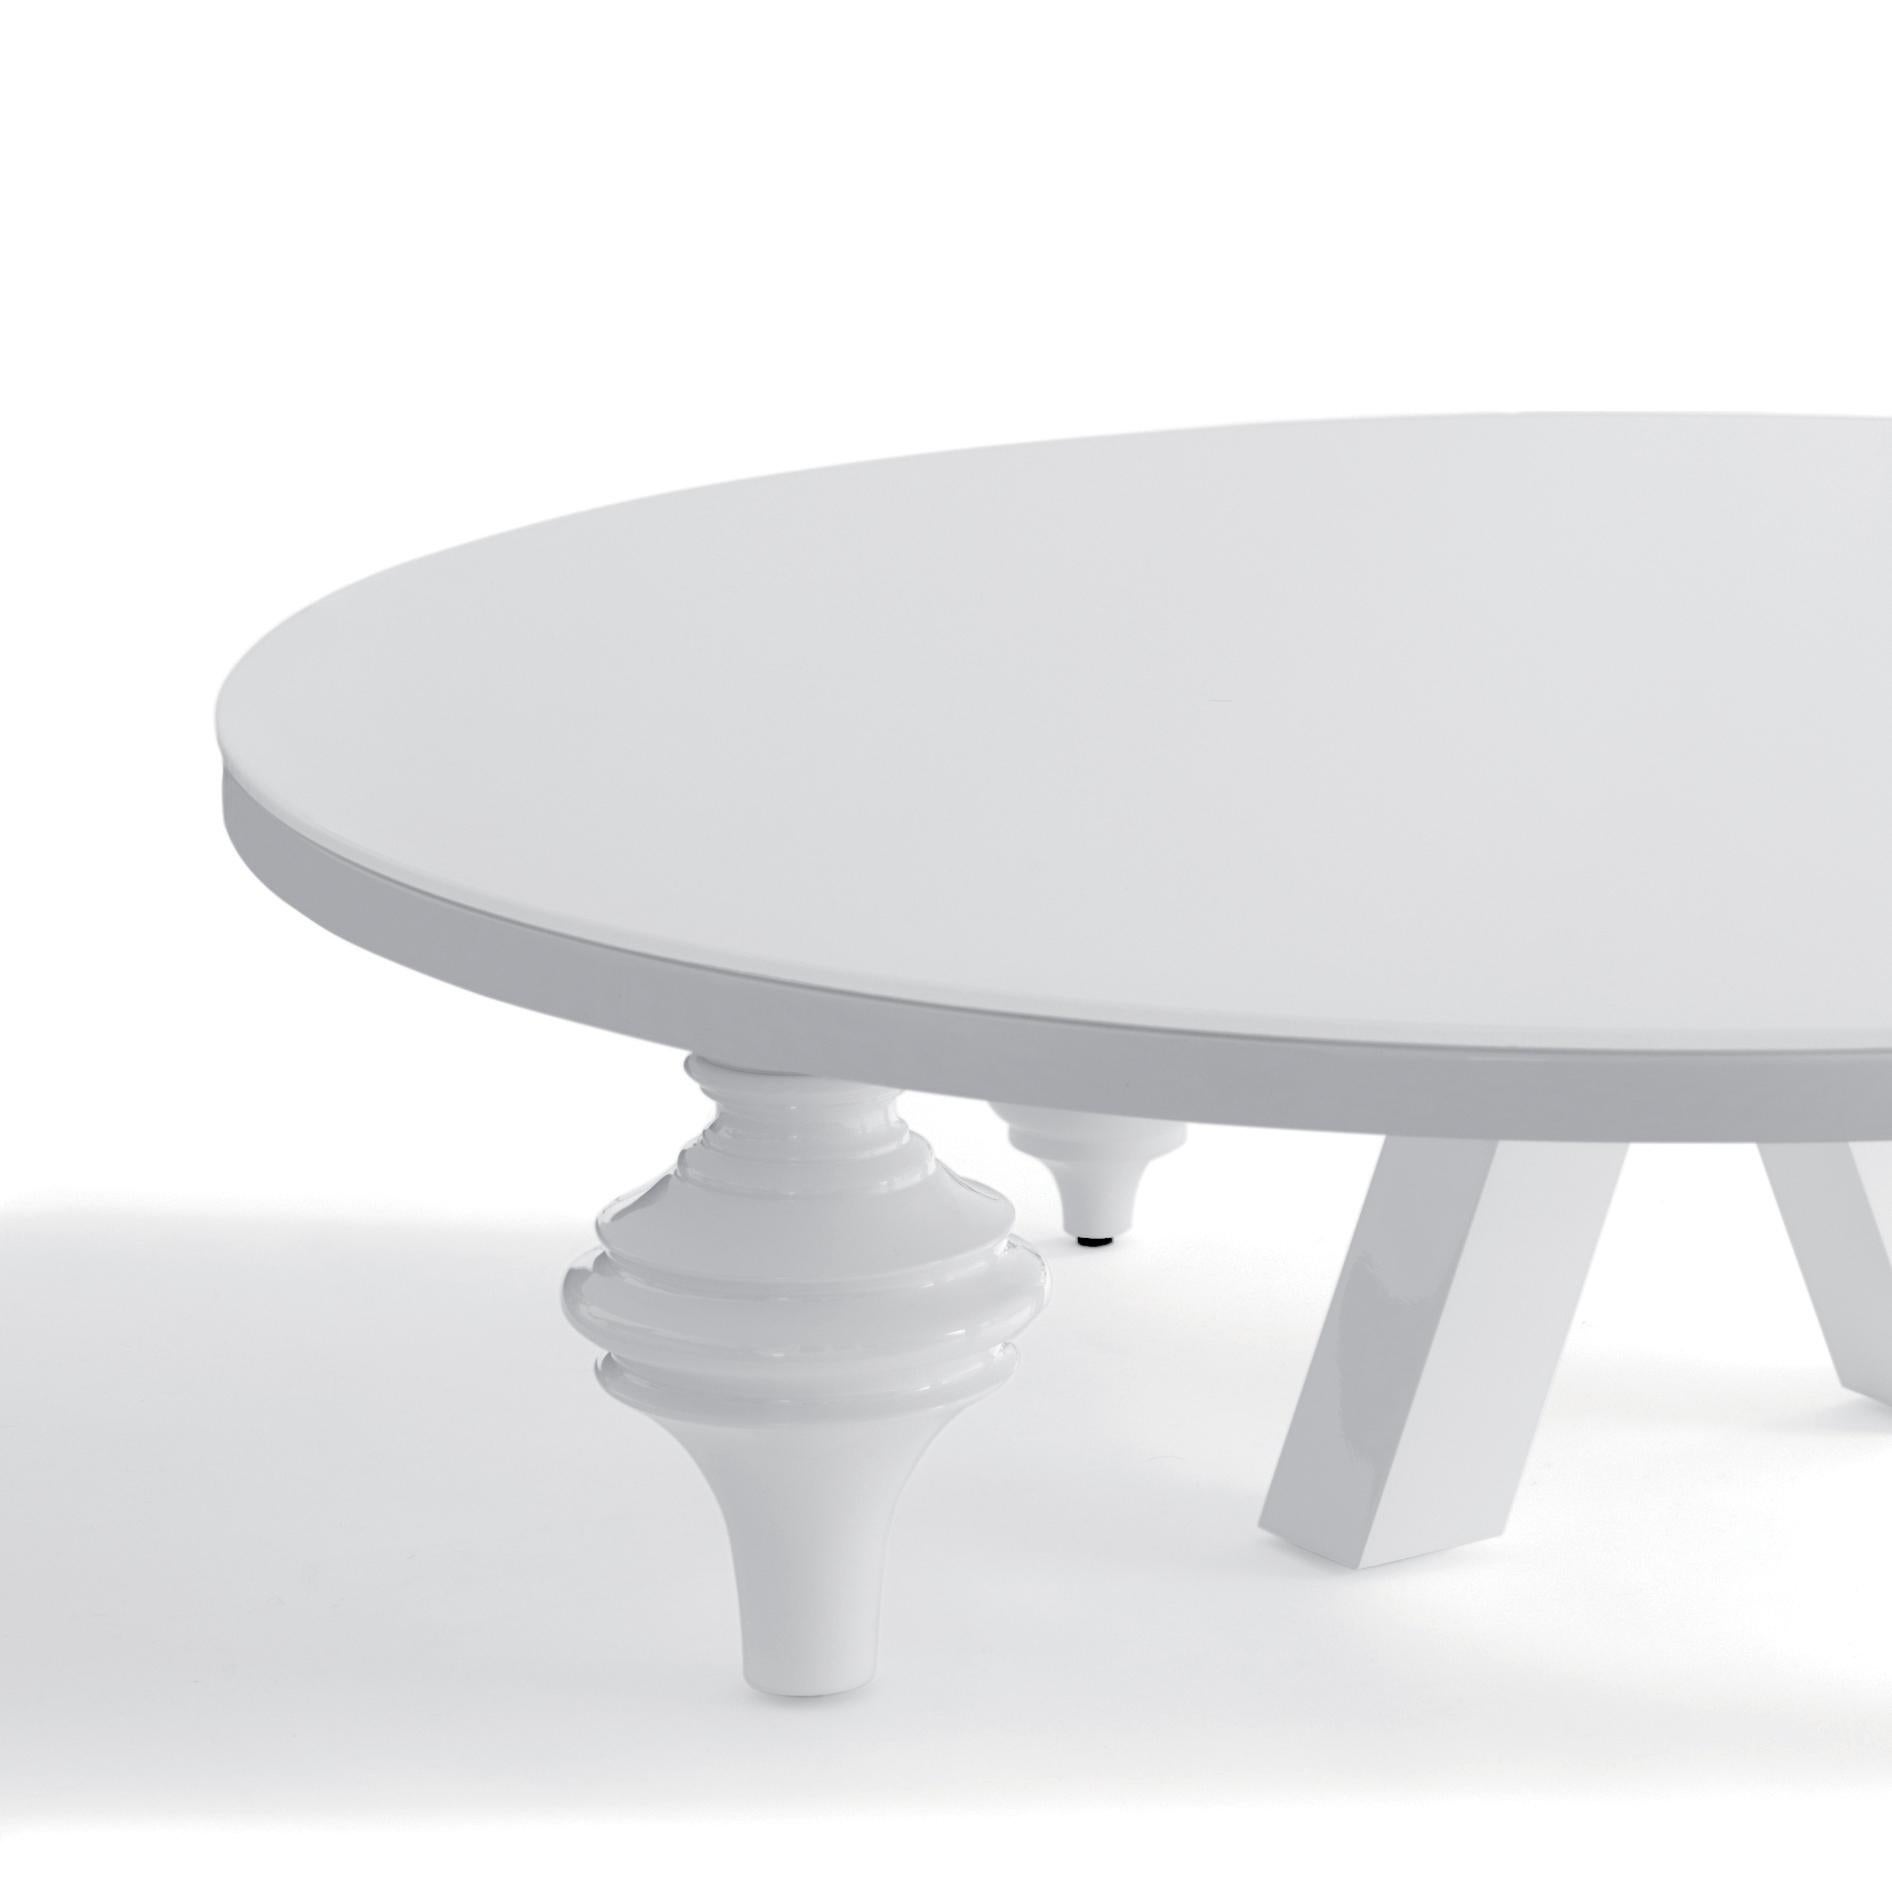 Low table designed by Jaime Hayon.
Manufactured by BD Barcelona Design.

MDF base and legs in turned solid alder wood, lacquered in white 

Rounded table measures:
Ø 80/120 x H. 35 cm.